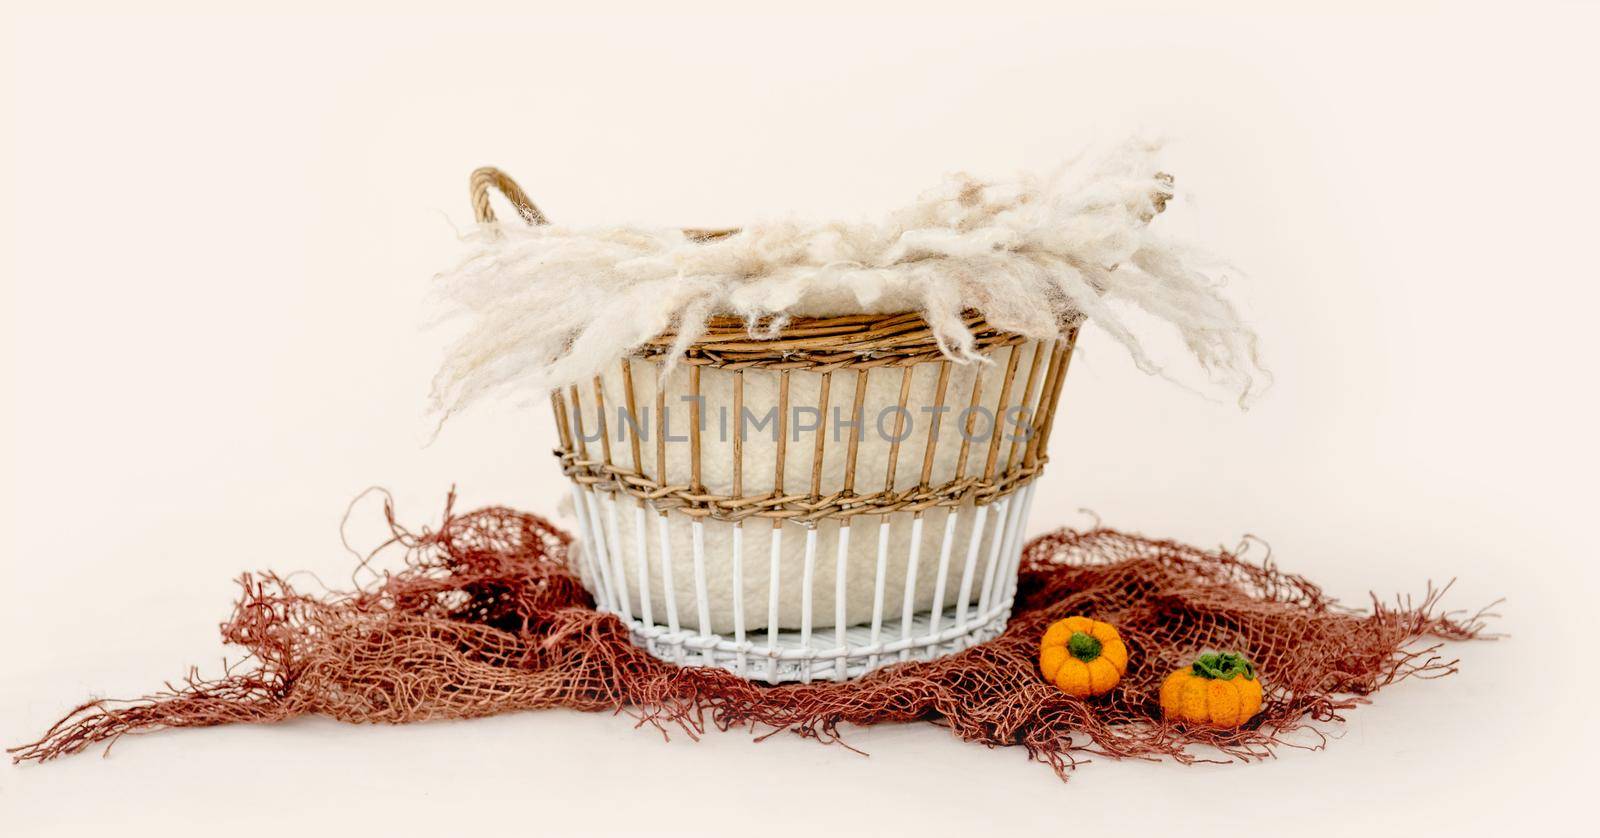 Decoration basket for newborn studio photoshoot in autumn. Tiny bed with pampkins toys for infant baby photos